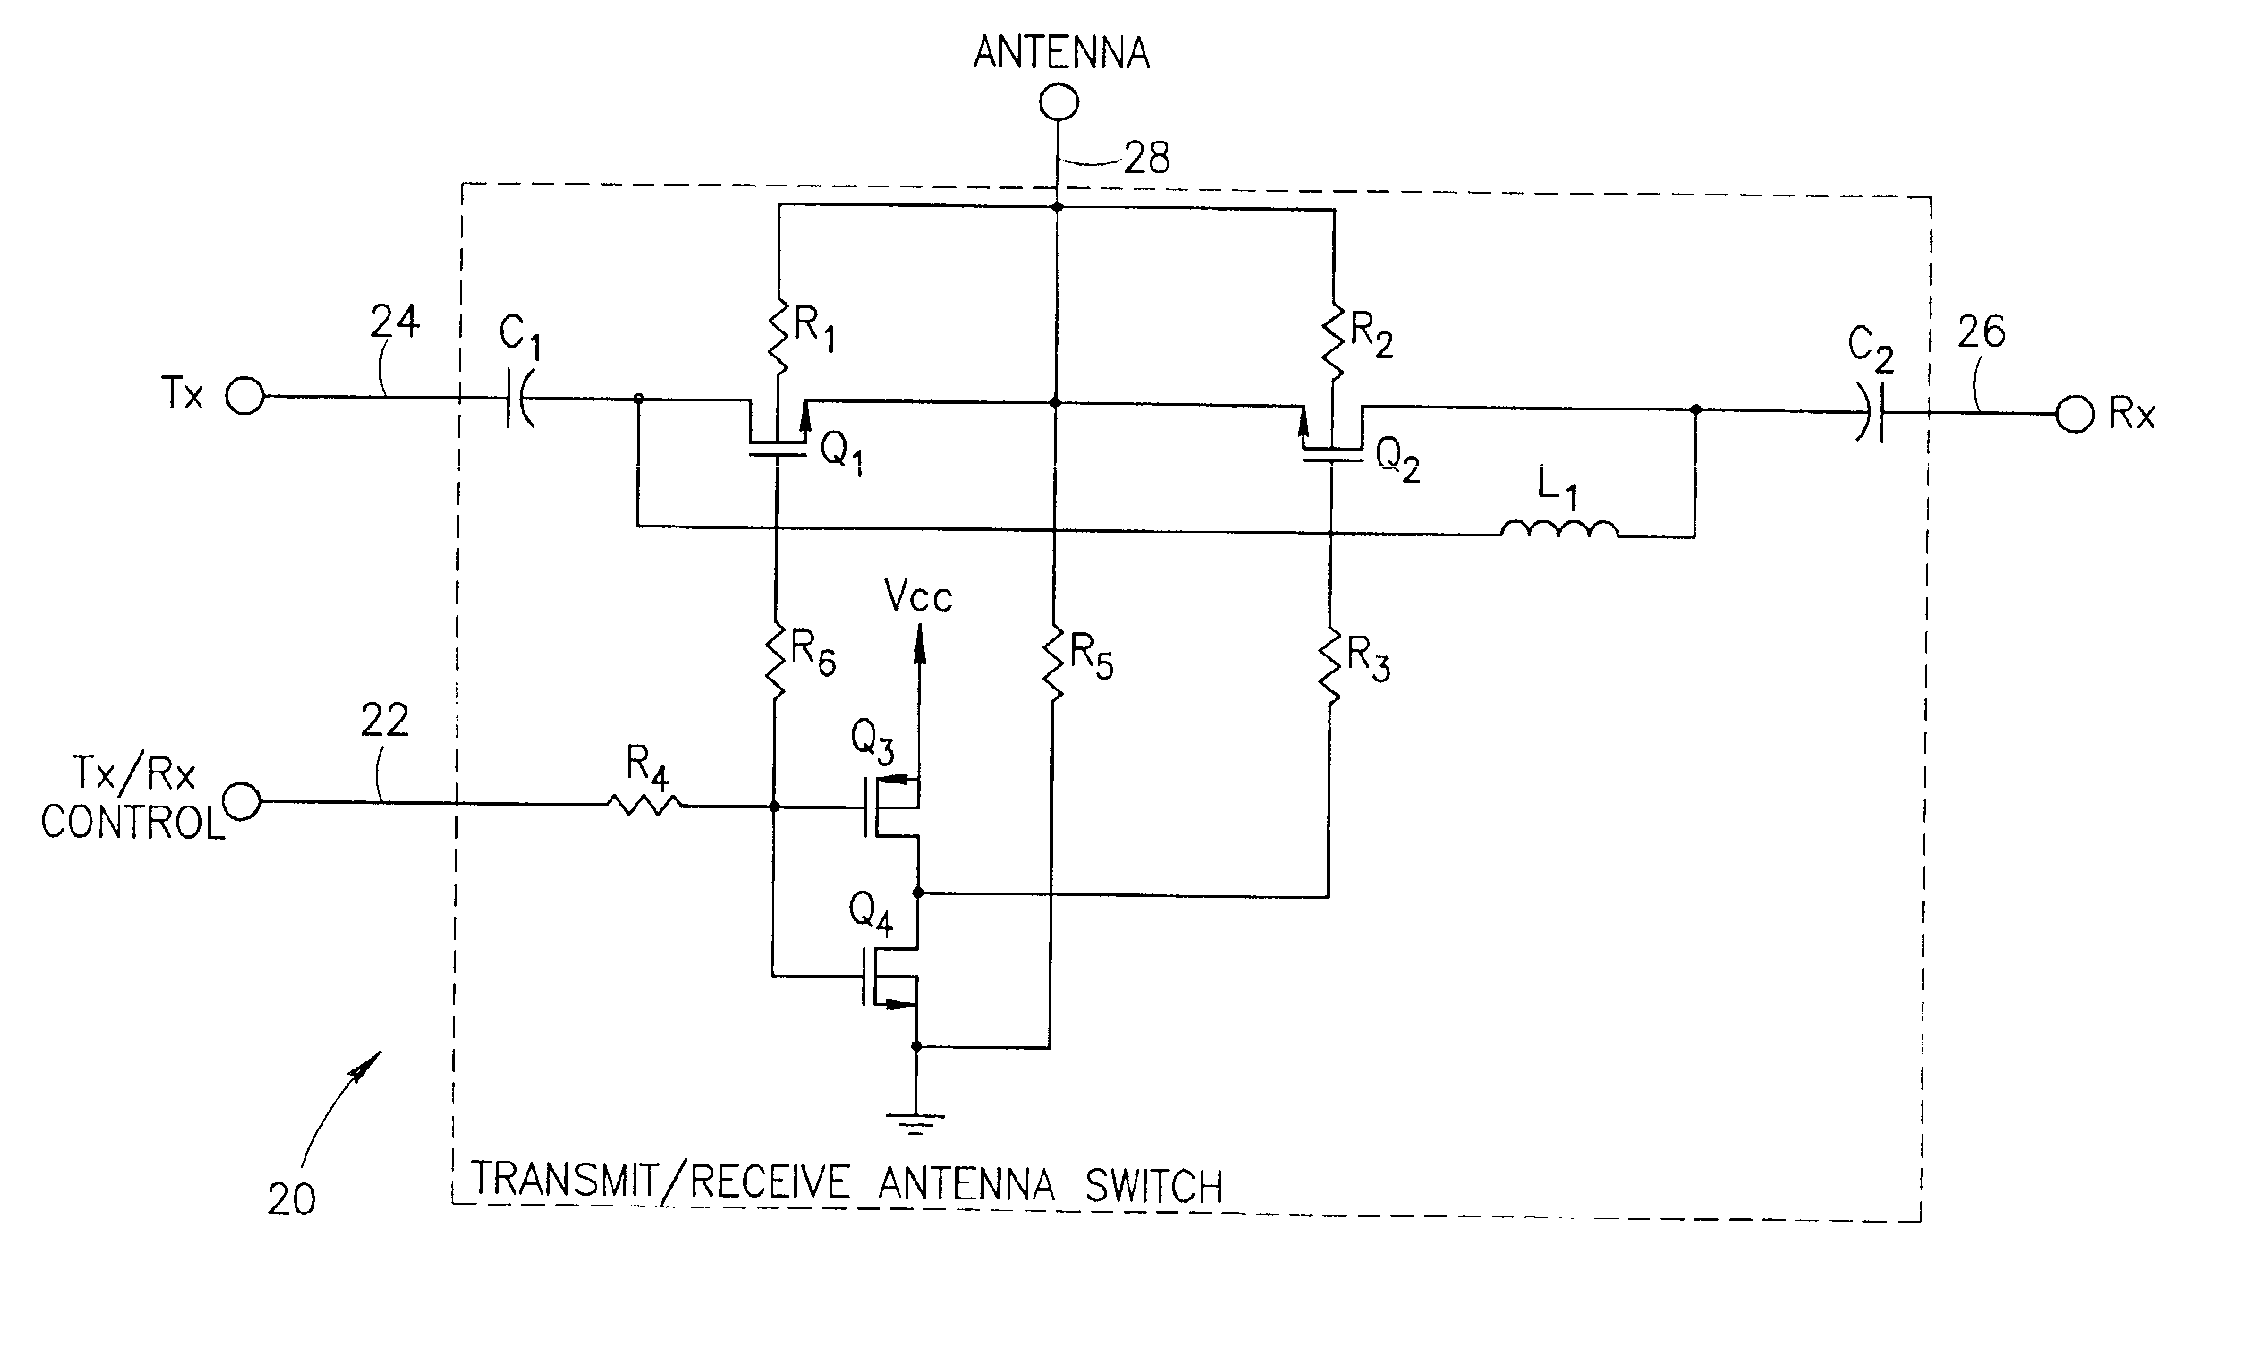 Integrated circuit incorporating RF antenna switch and power amplifier